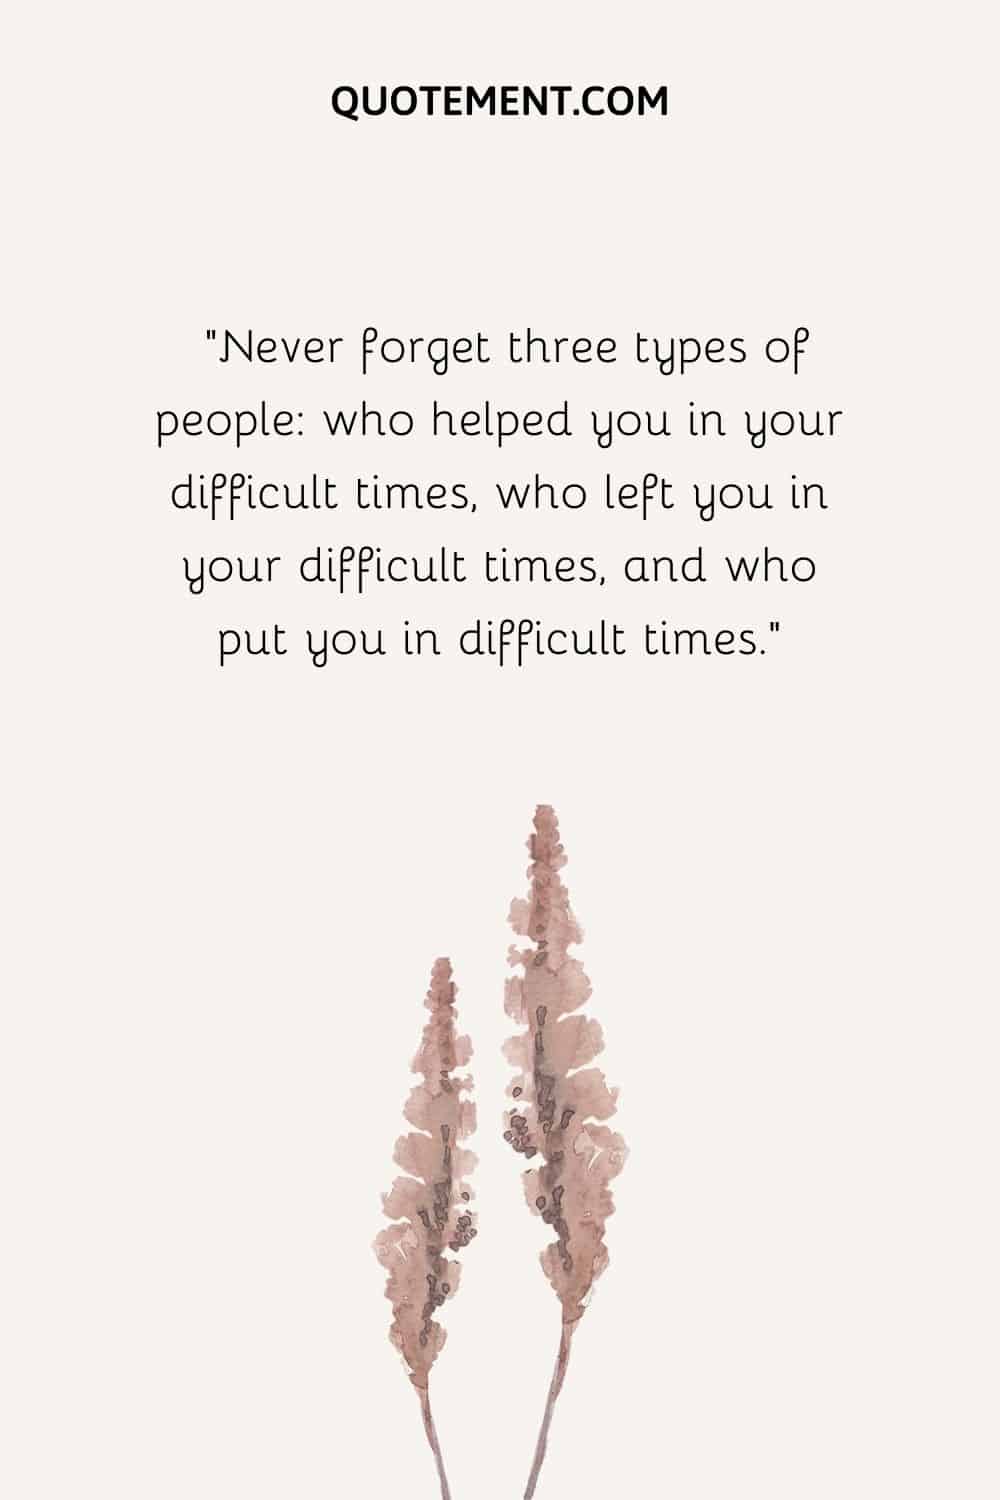 Never forget three types of people who helped you in your difficult times, who left you in your difficult times, and who put you in difficult times.